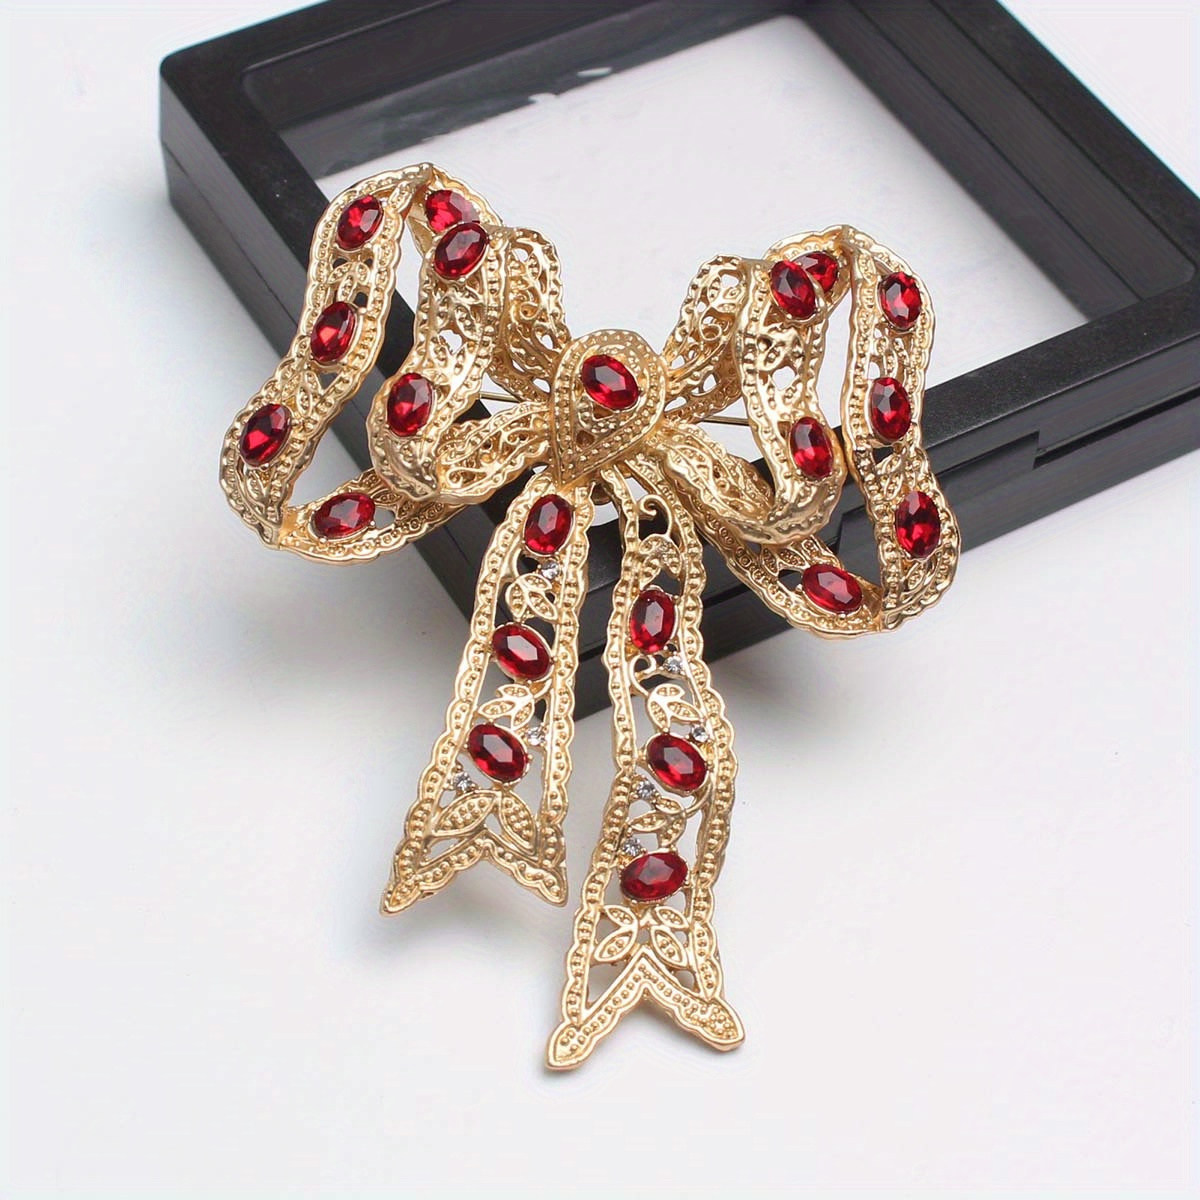 

Exquisite Vintage Baroque-style Bowknot Brooch Pin With Rhinestones And Glass - Unisex Luxury Ribbon Fashion Accessory For All Seasons, Suitable For Daily And Party Occasions - No Plating